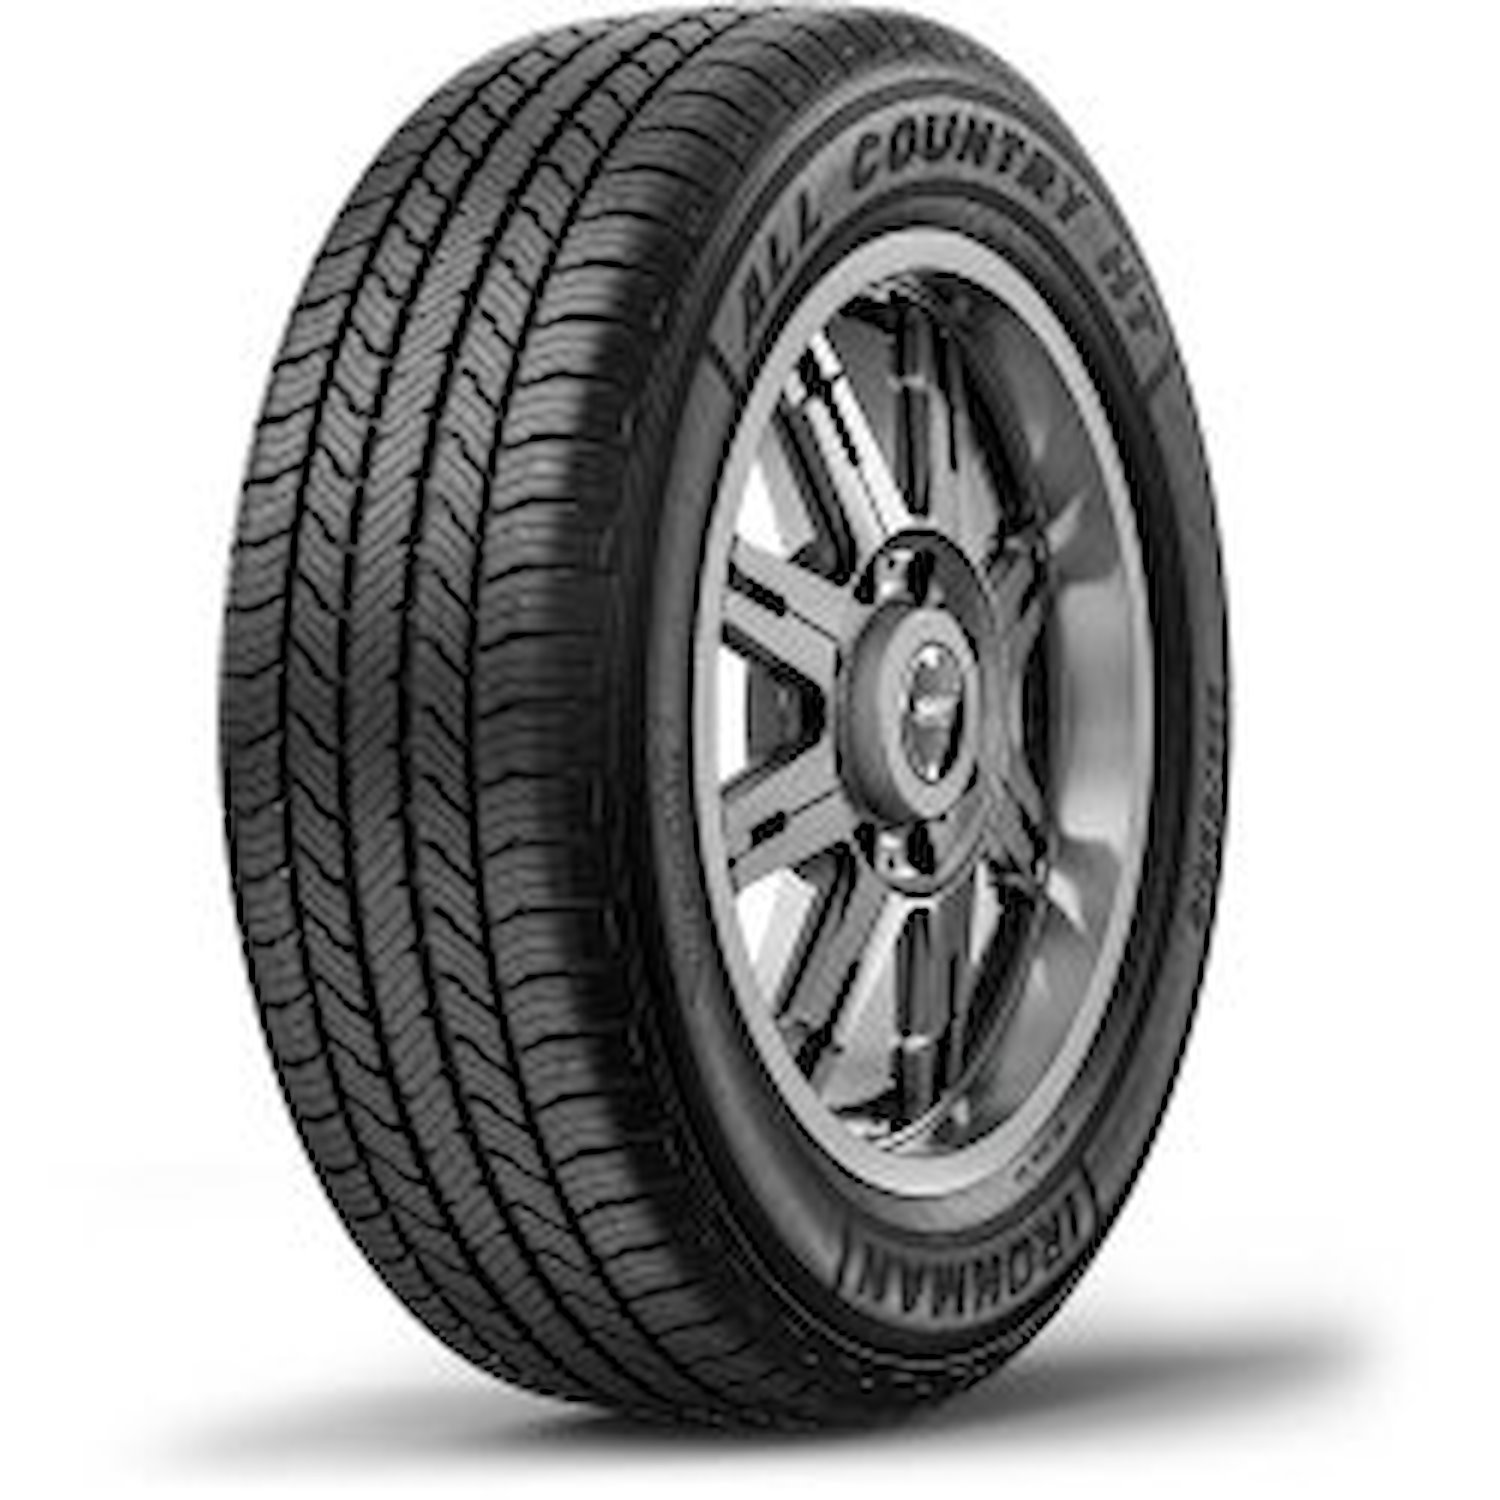 03065 All Country HT Tire, 265/70R16, 112T